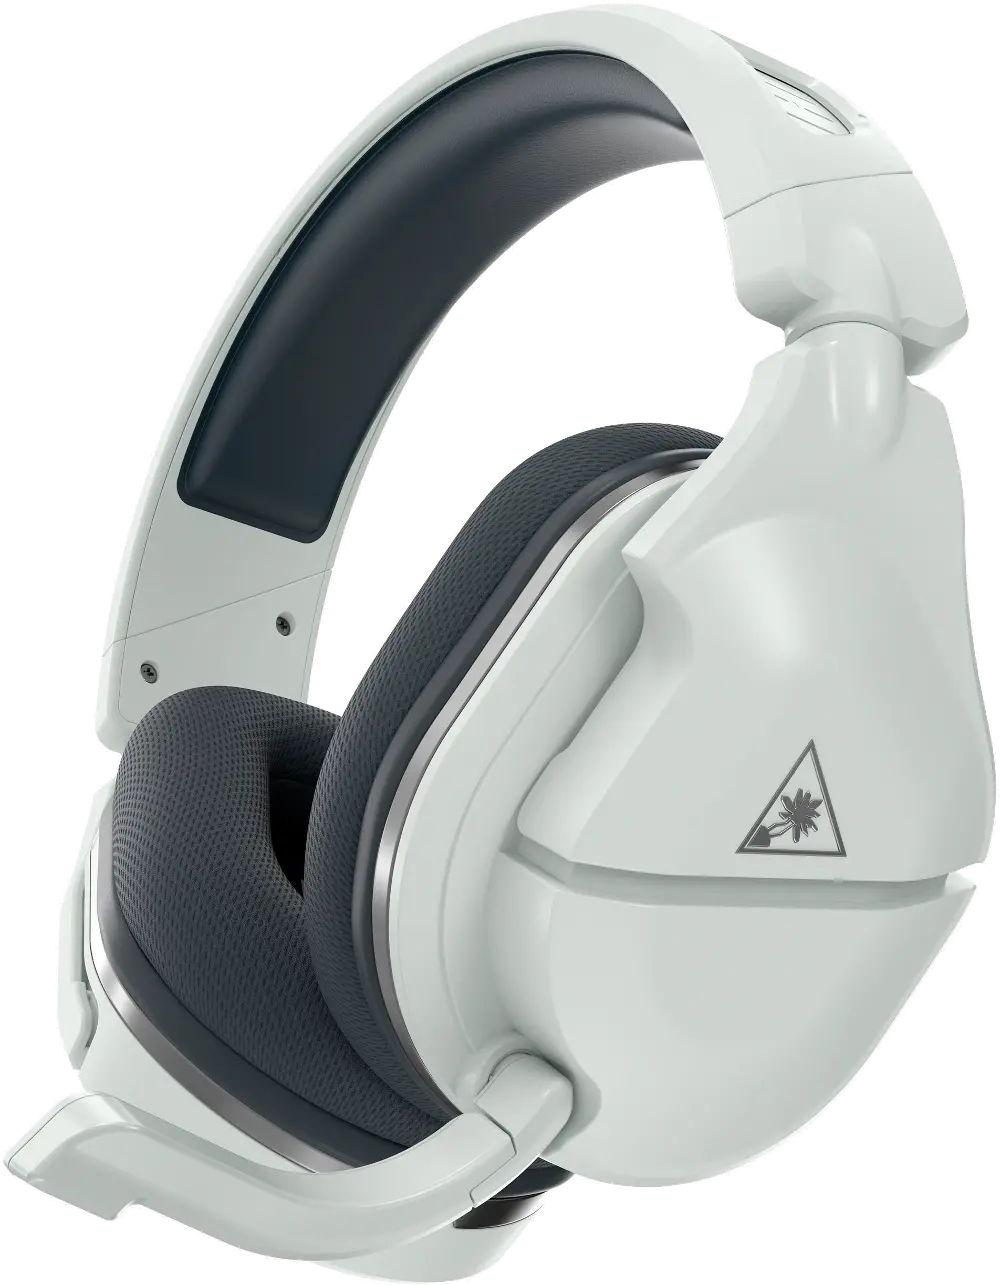 TBS/STLTH_600_PG2U-W Turtle Beach Stealth 600 Gen 2 USB PS Wireless Amplified Gaming Headset for PS5, PS4 - White-1